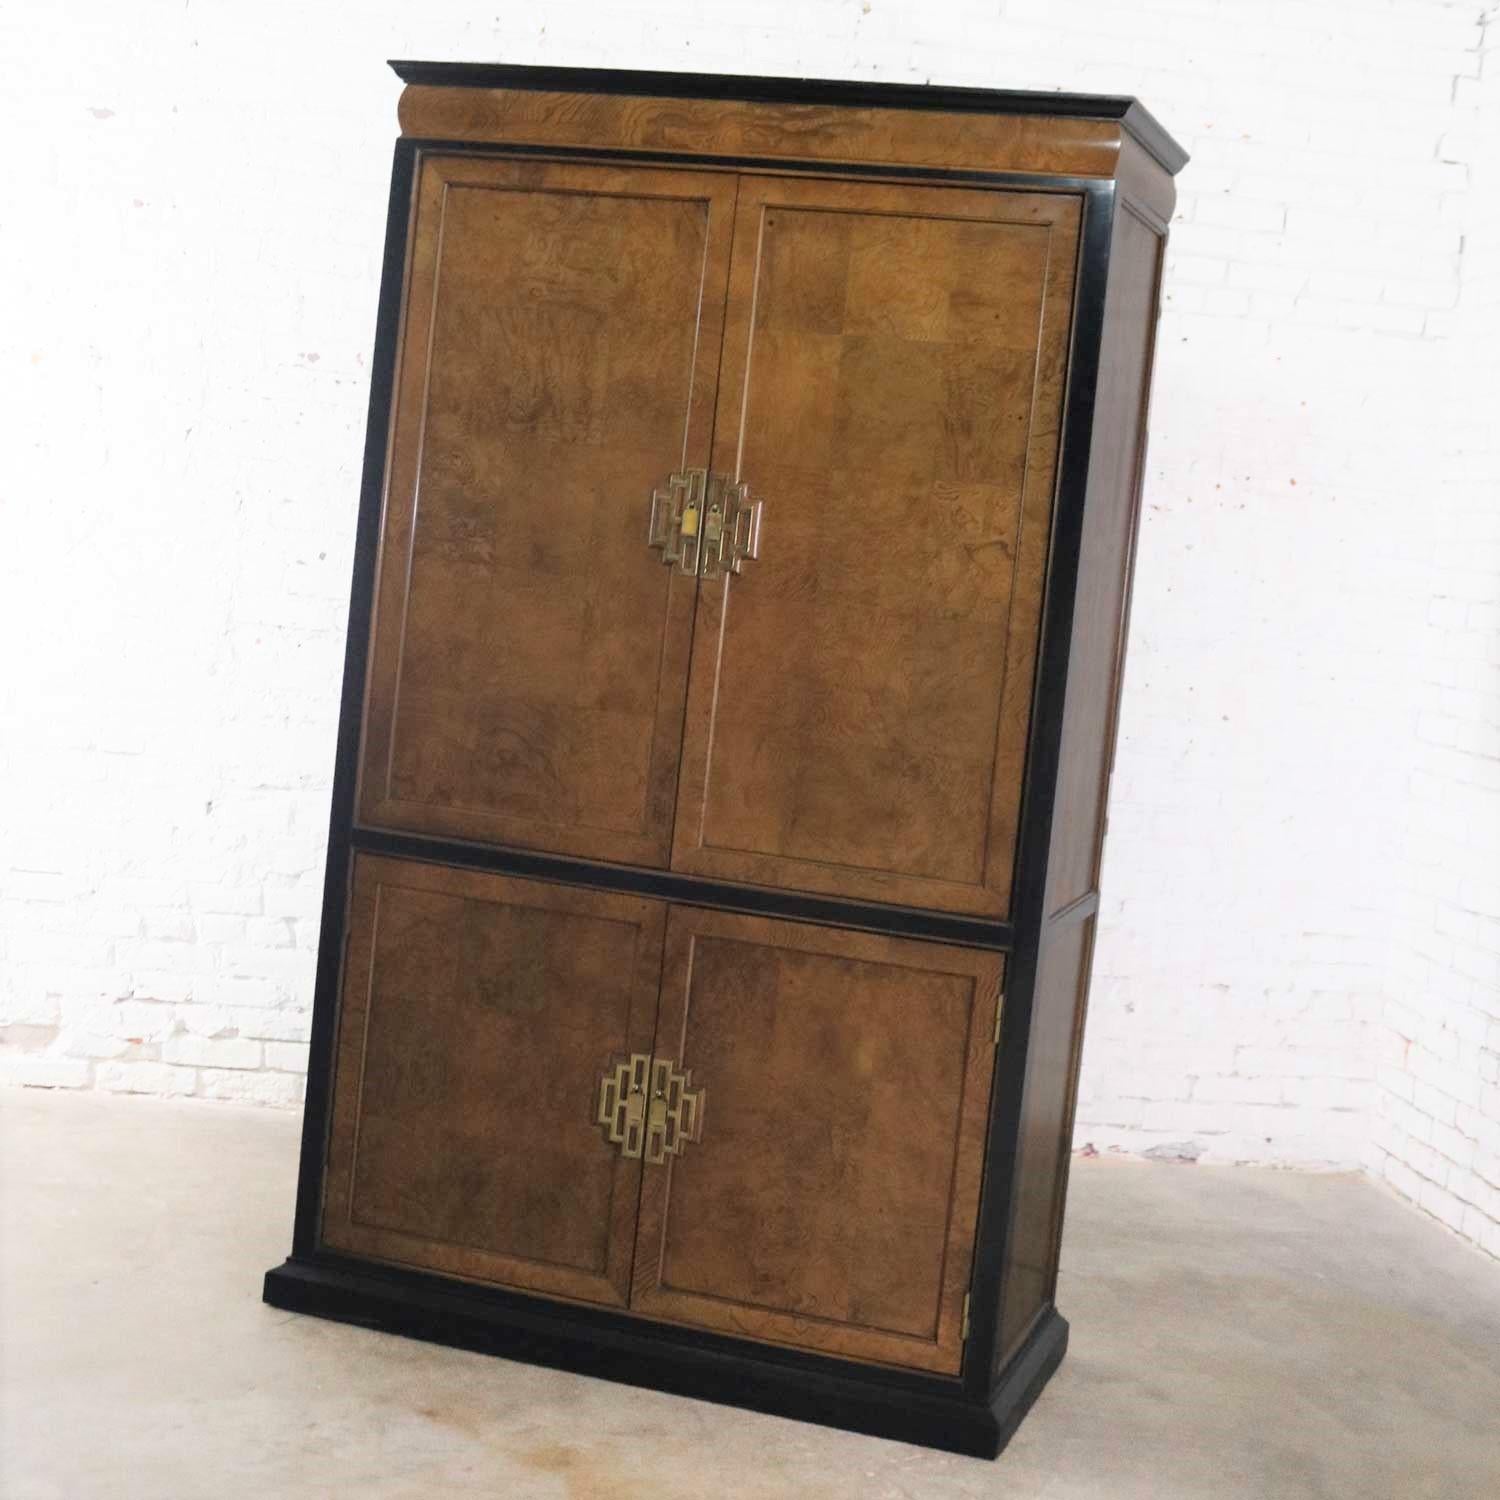 Incredible Hollywood Regency chinoiserie entertainment cabinet or storage armoire designed by Raymond K. Sobota for his Chin Hua collection for Century Furniture. It is in wonderful vintage condition overall. It does have normal signs of age and use